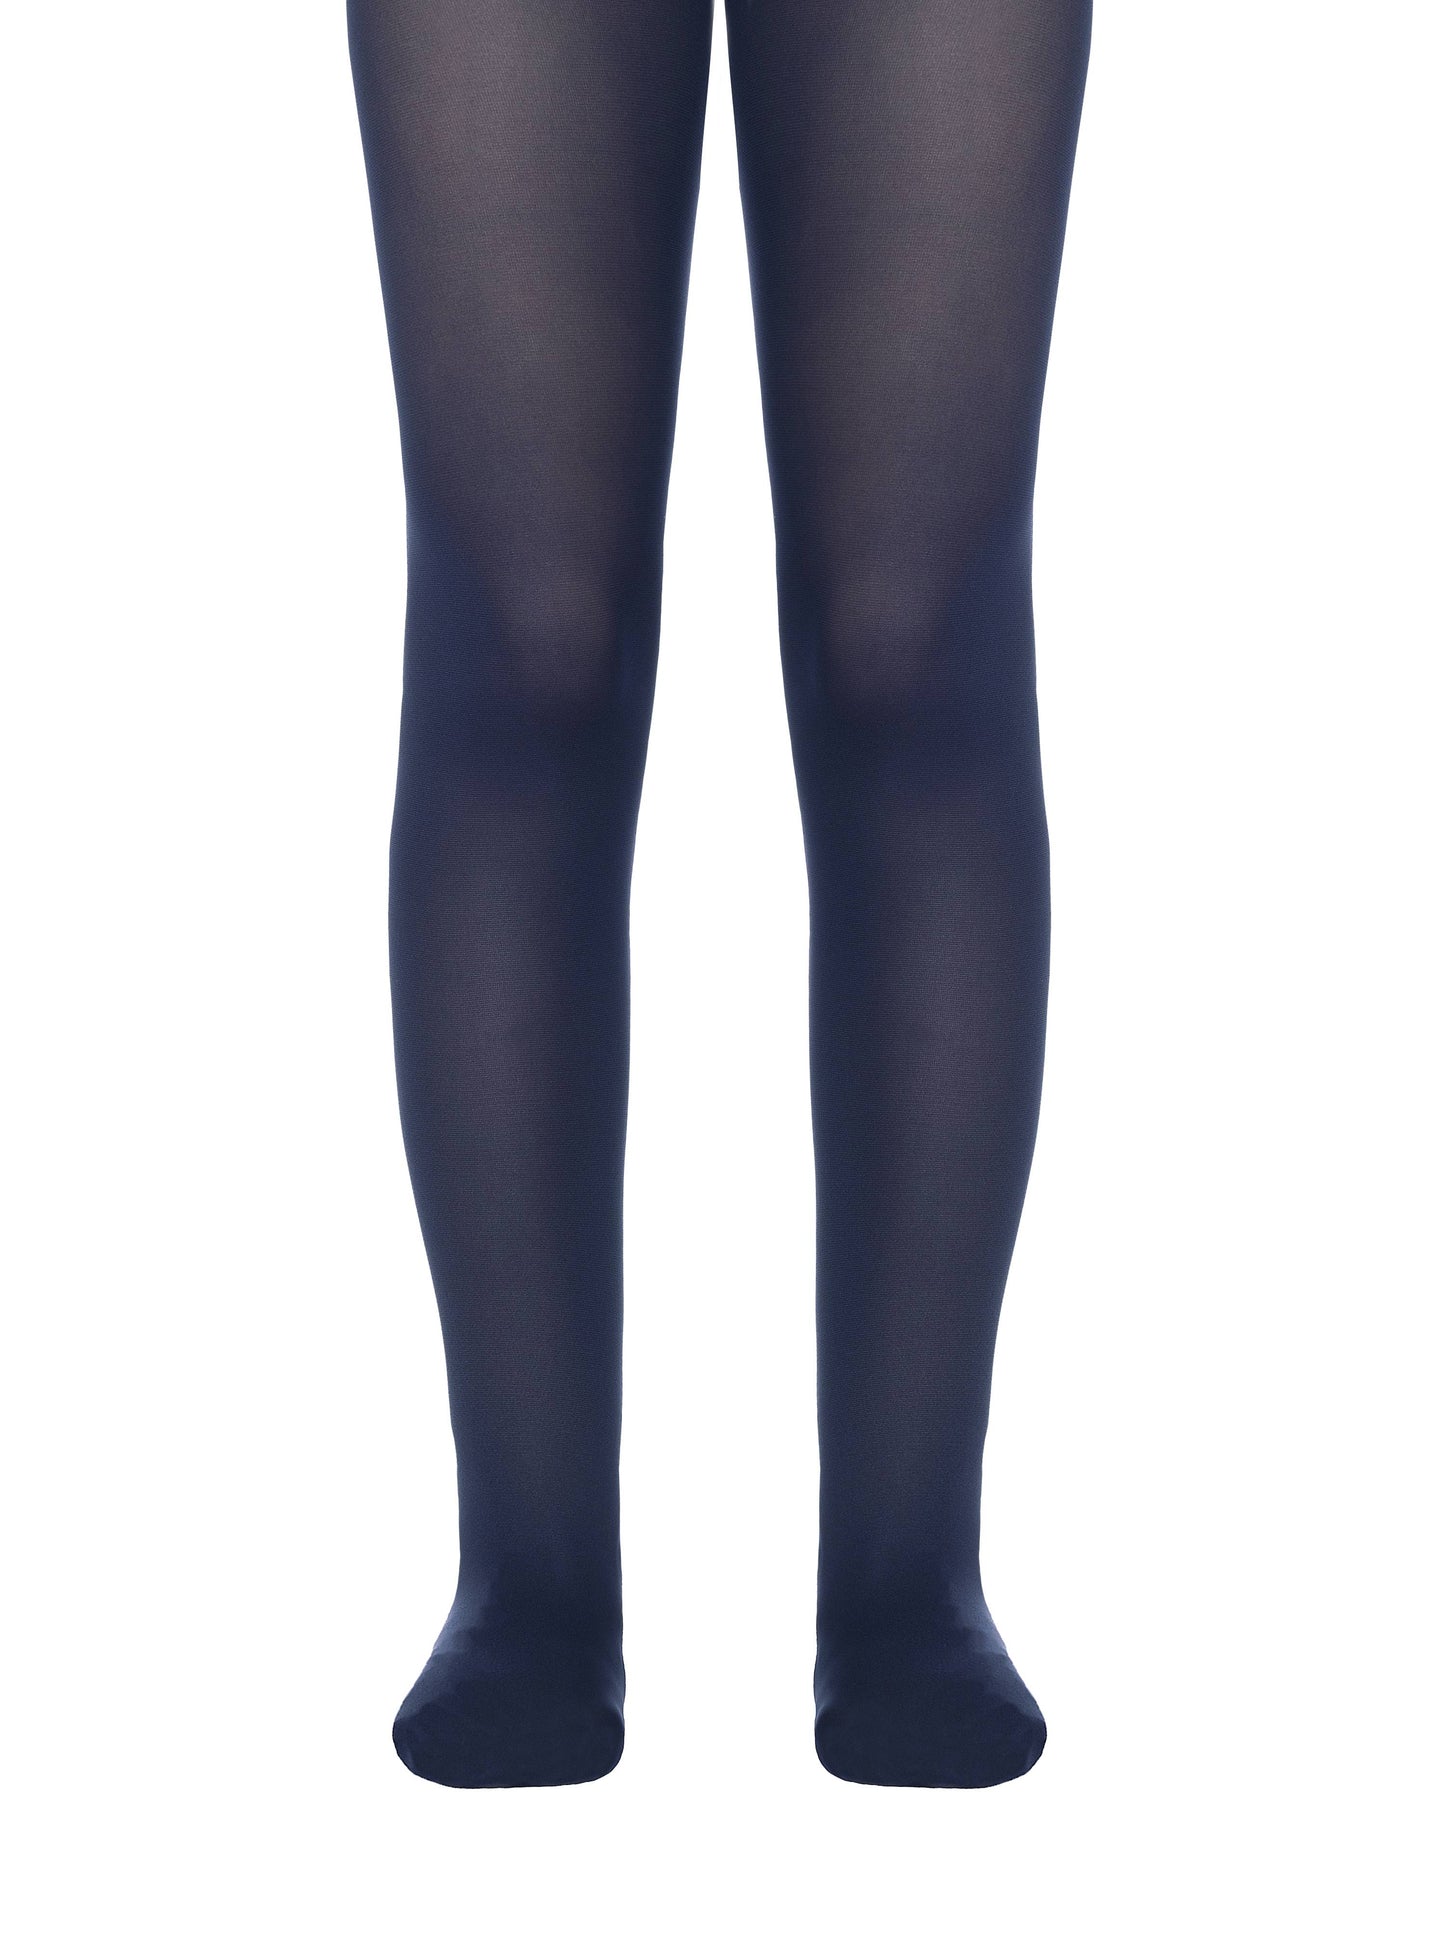 Conte Only Teens 40 Den - Fantasy Semi-Opaque Classic Tights For Girls/Teens - 14yr. 16yr. (12С-46СП)